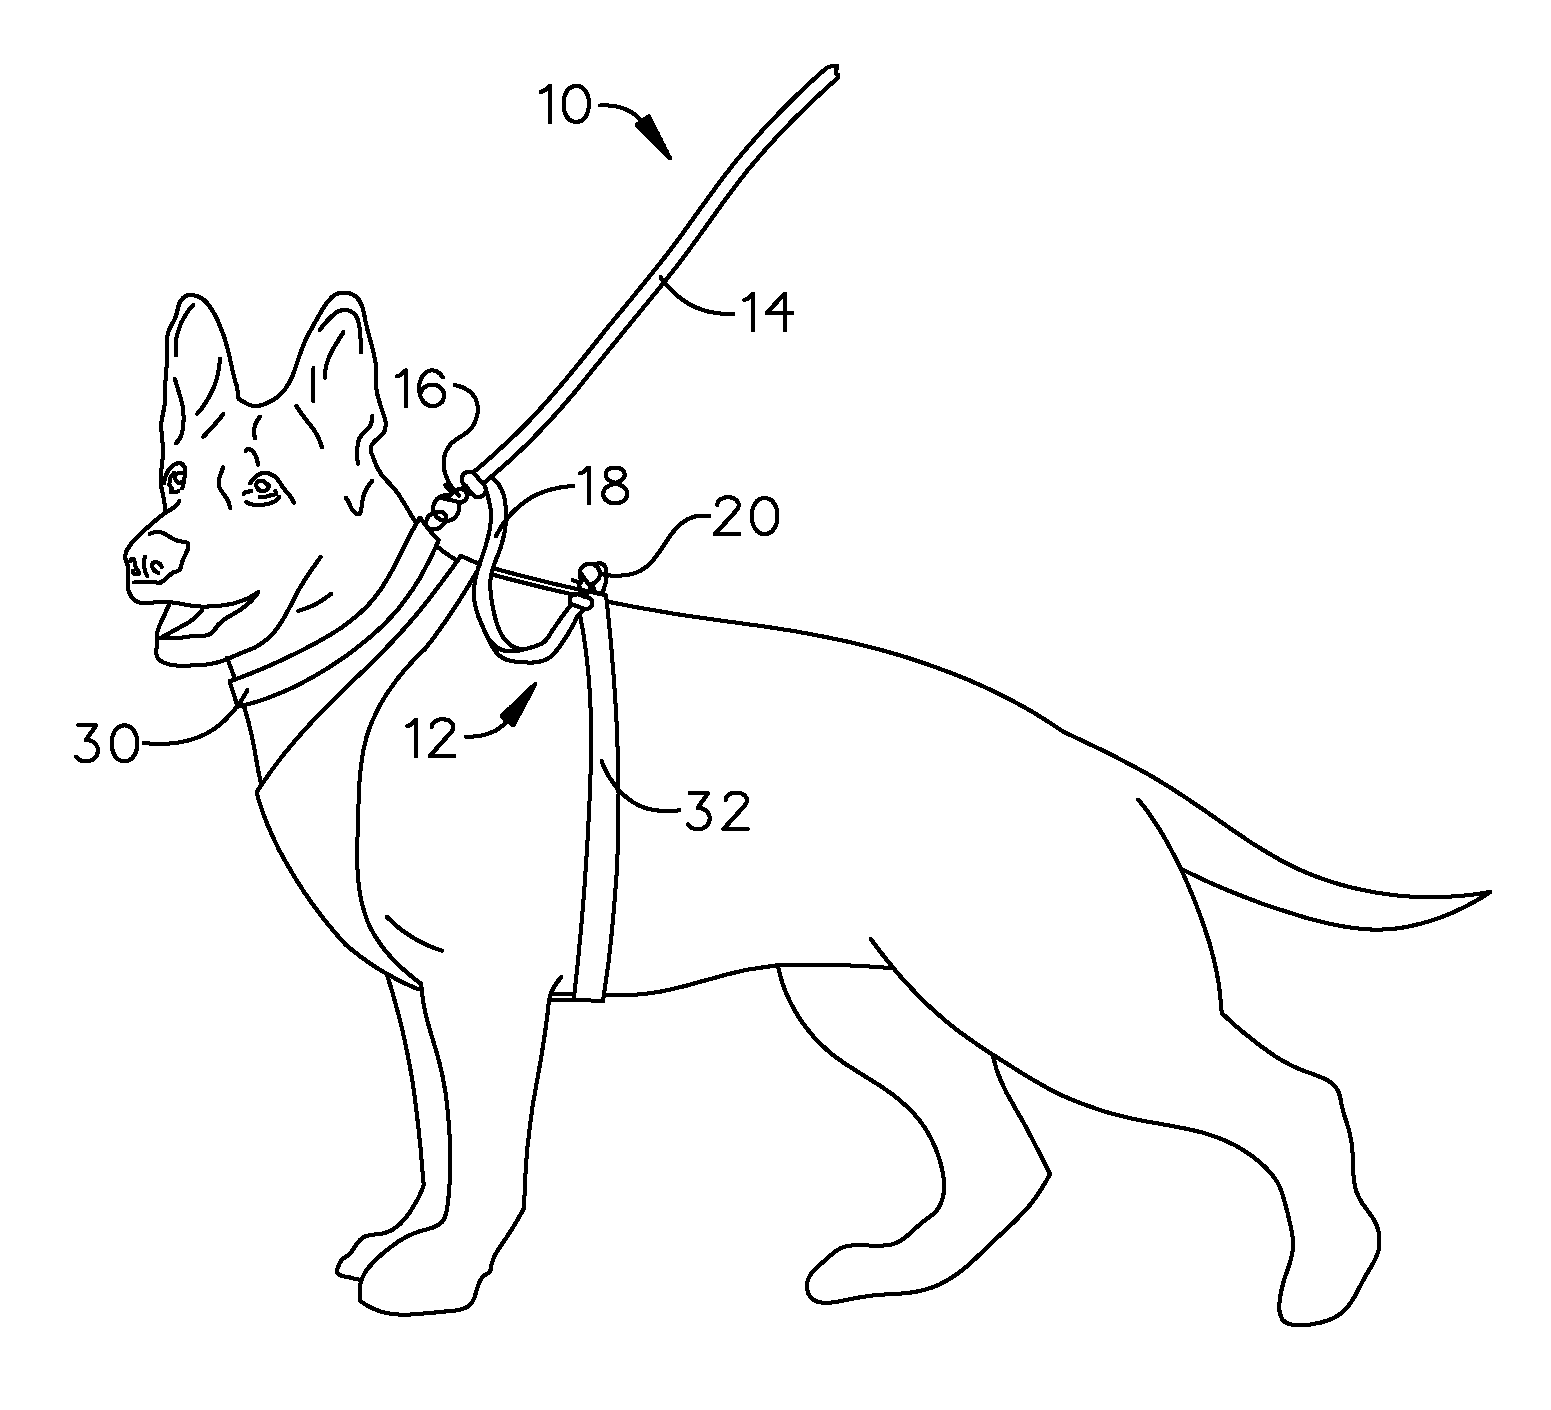 Pet leash with adjustable security extension